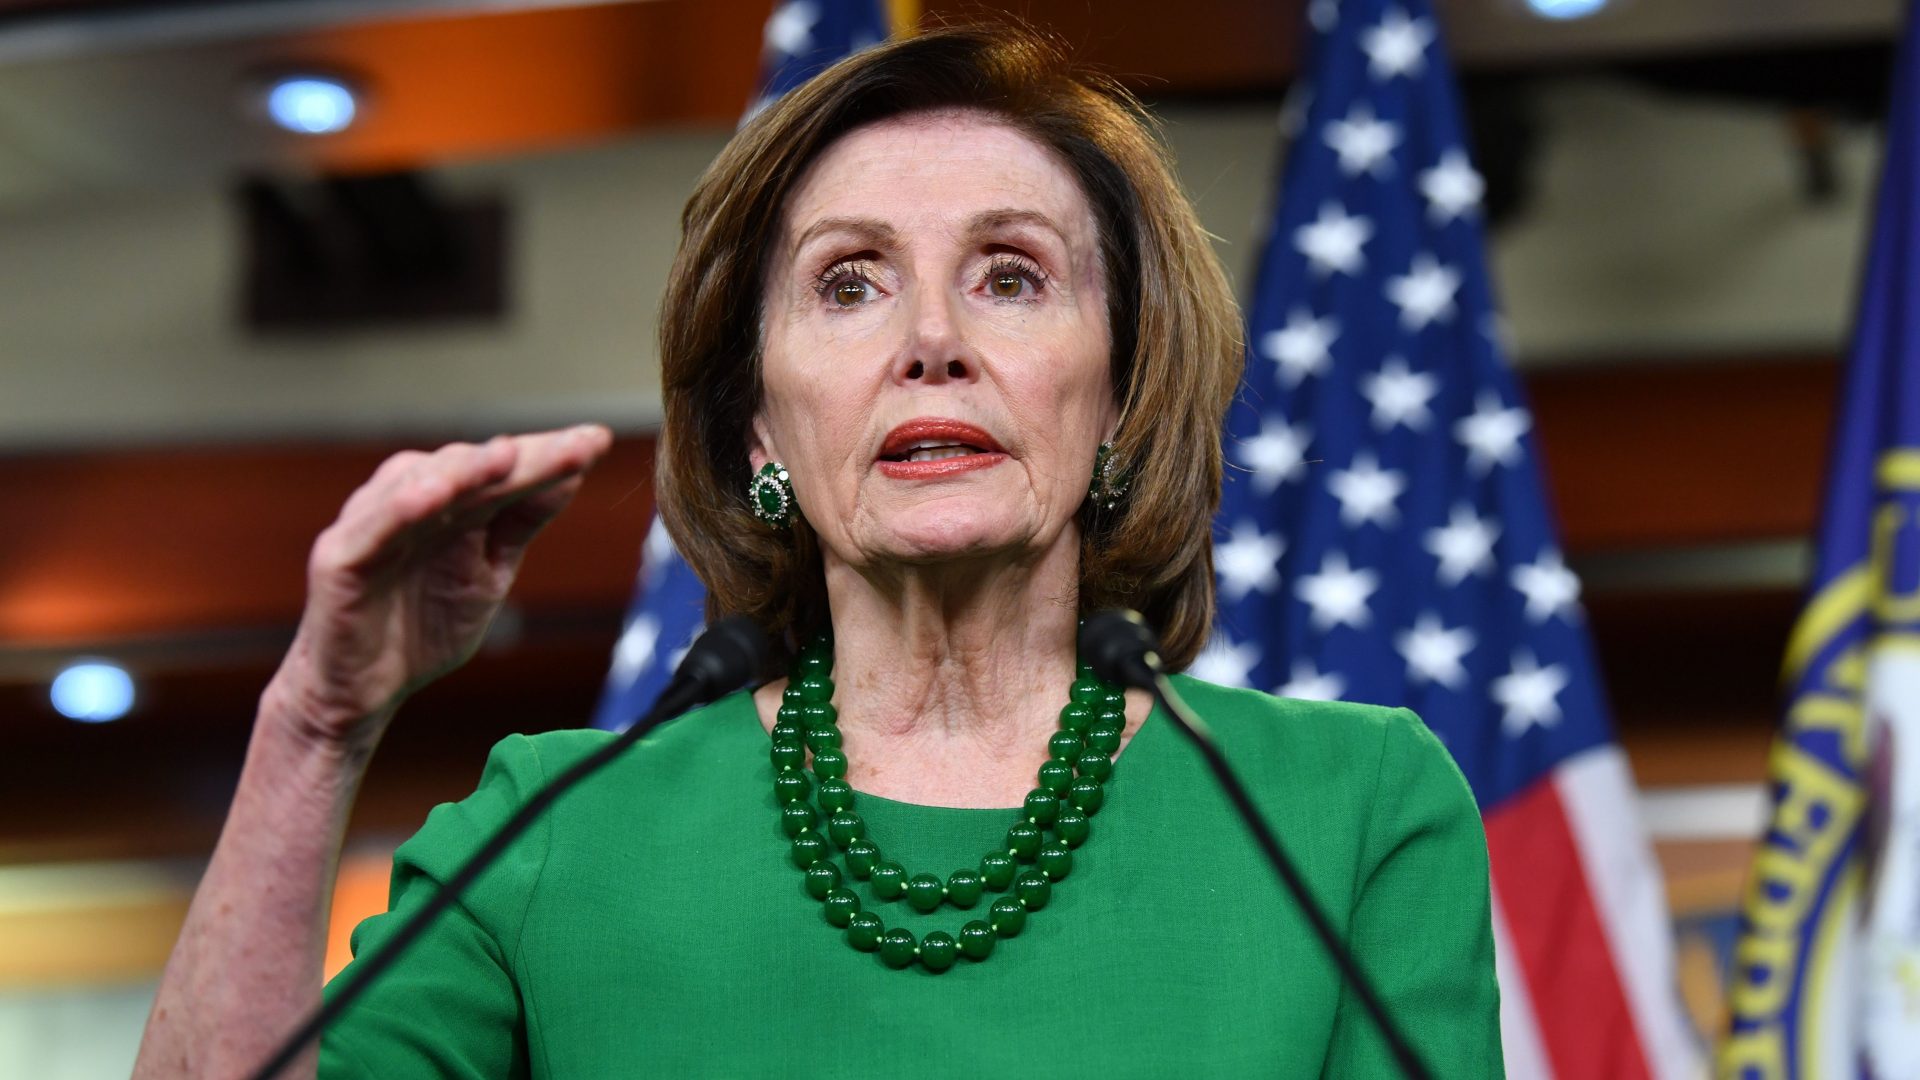 Archbishop says Pelosi will be denied Communion because she supports abortion rights